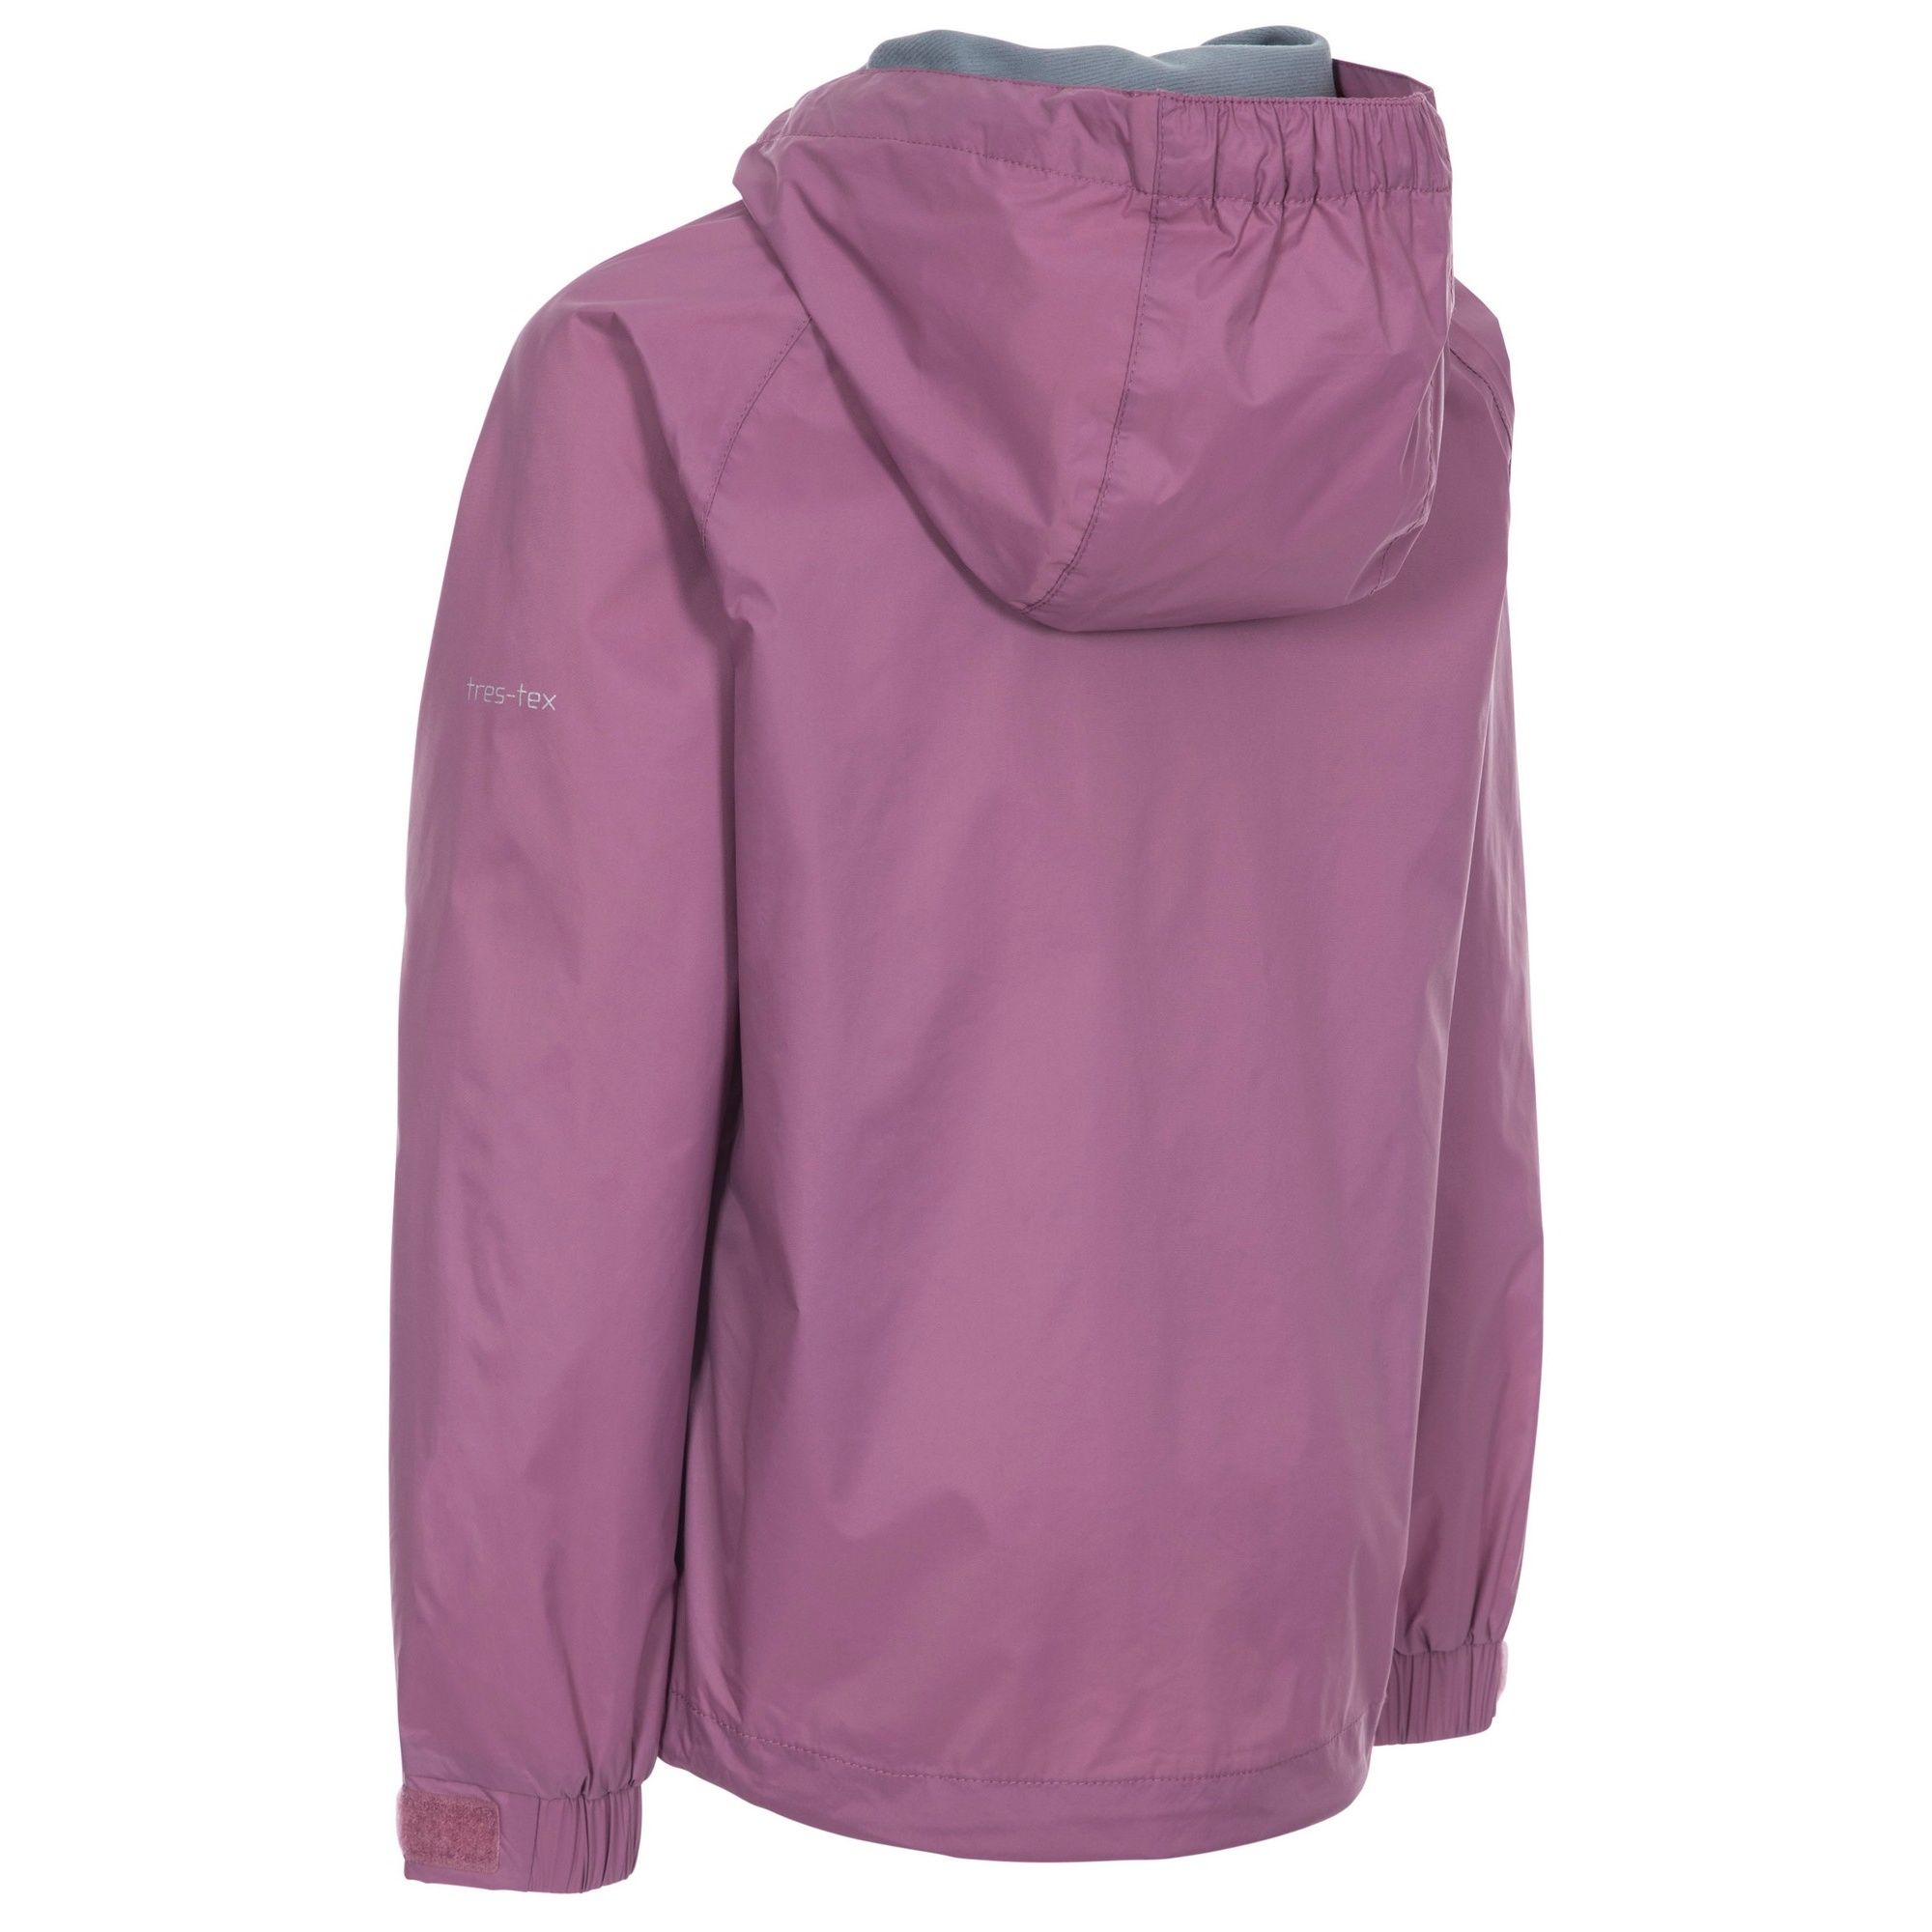 Shell: 100% Polyester, PU coating, Lining: 100% Polyester. 2 lower zip pockets. Adjustable good. Adjustable cuffs with touch fastening tab. Contrast front zip and mesh lining. Waterproof 5000mm, breathable 5000mvp, windproof, taped seams. Trespass Childrens Chest Sizing (approx): 2-3 Years - 21in/53cm, 3-4 Years - 22in/56cm, 5-6 Years - 24in/61cm, 7-8 Years - 26in/66cm, 9-10 Years - 28in/71cm, 11-12 Years - 31in/79cm.